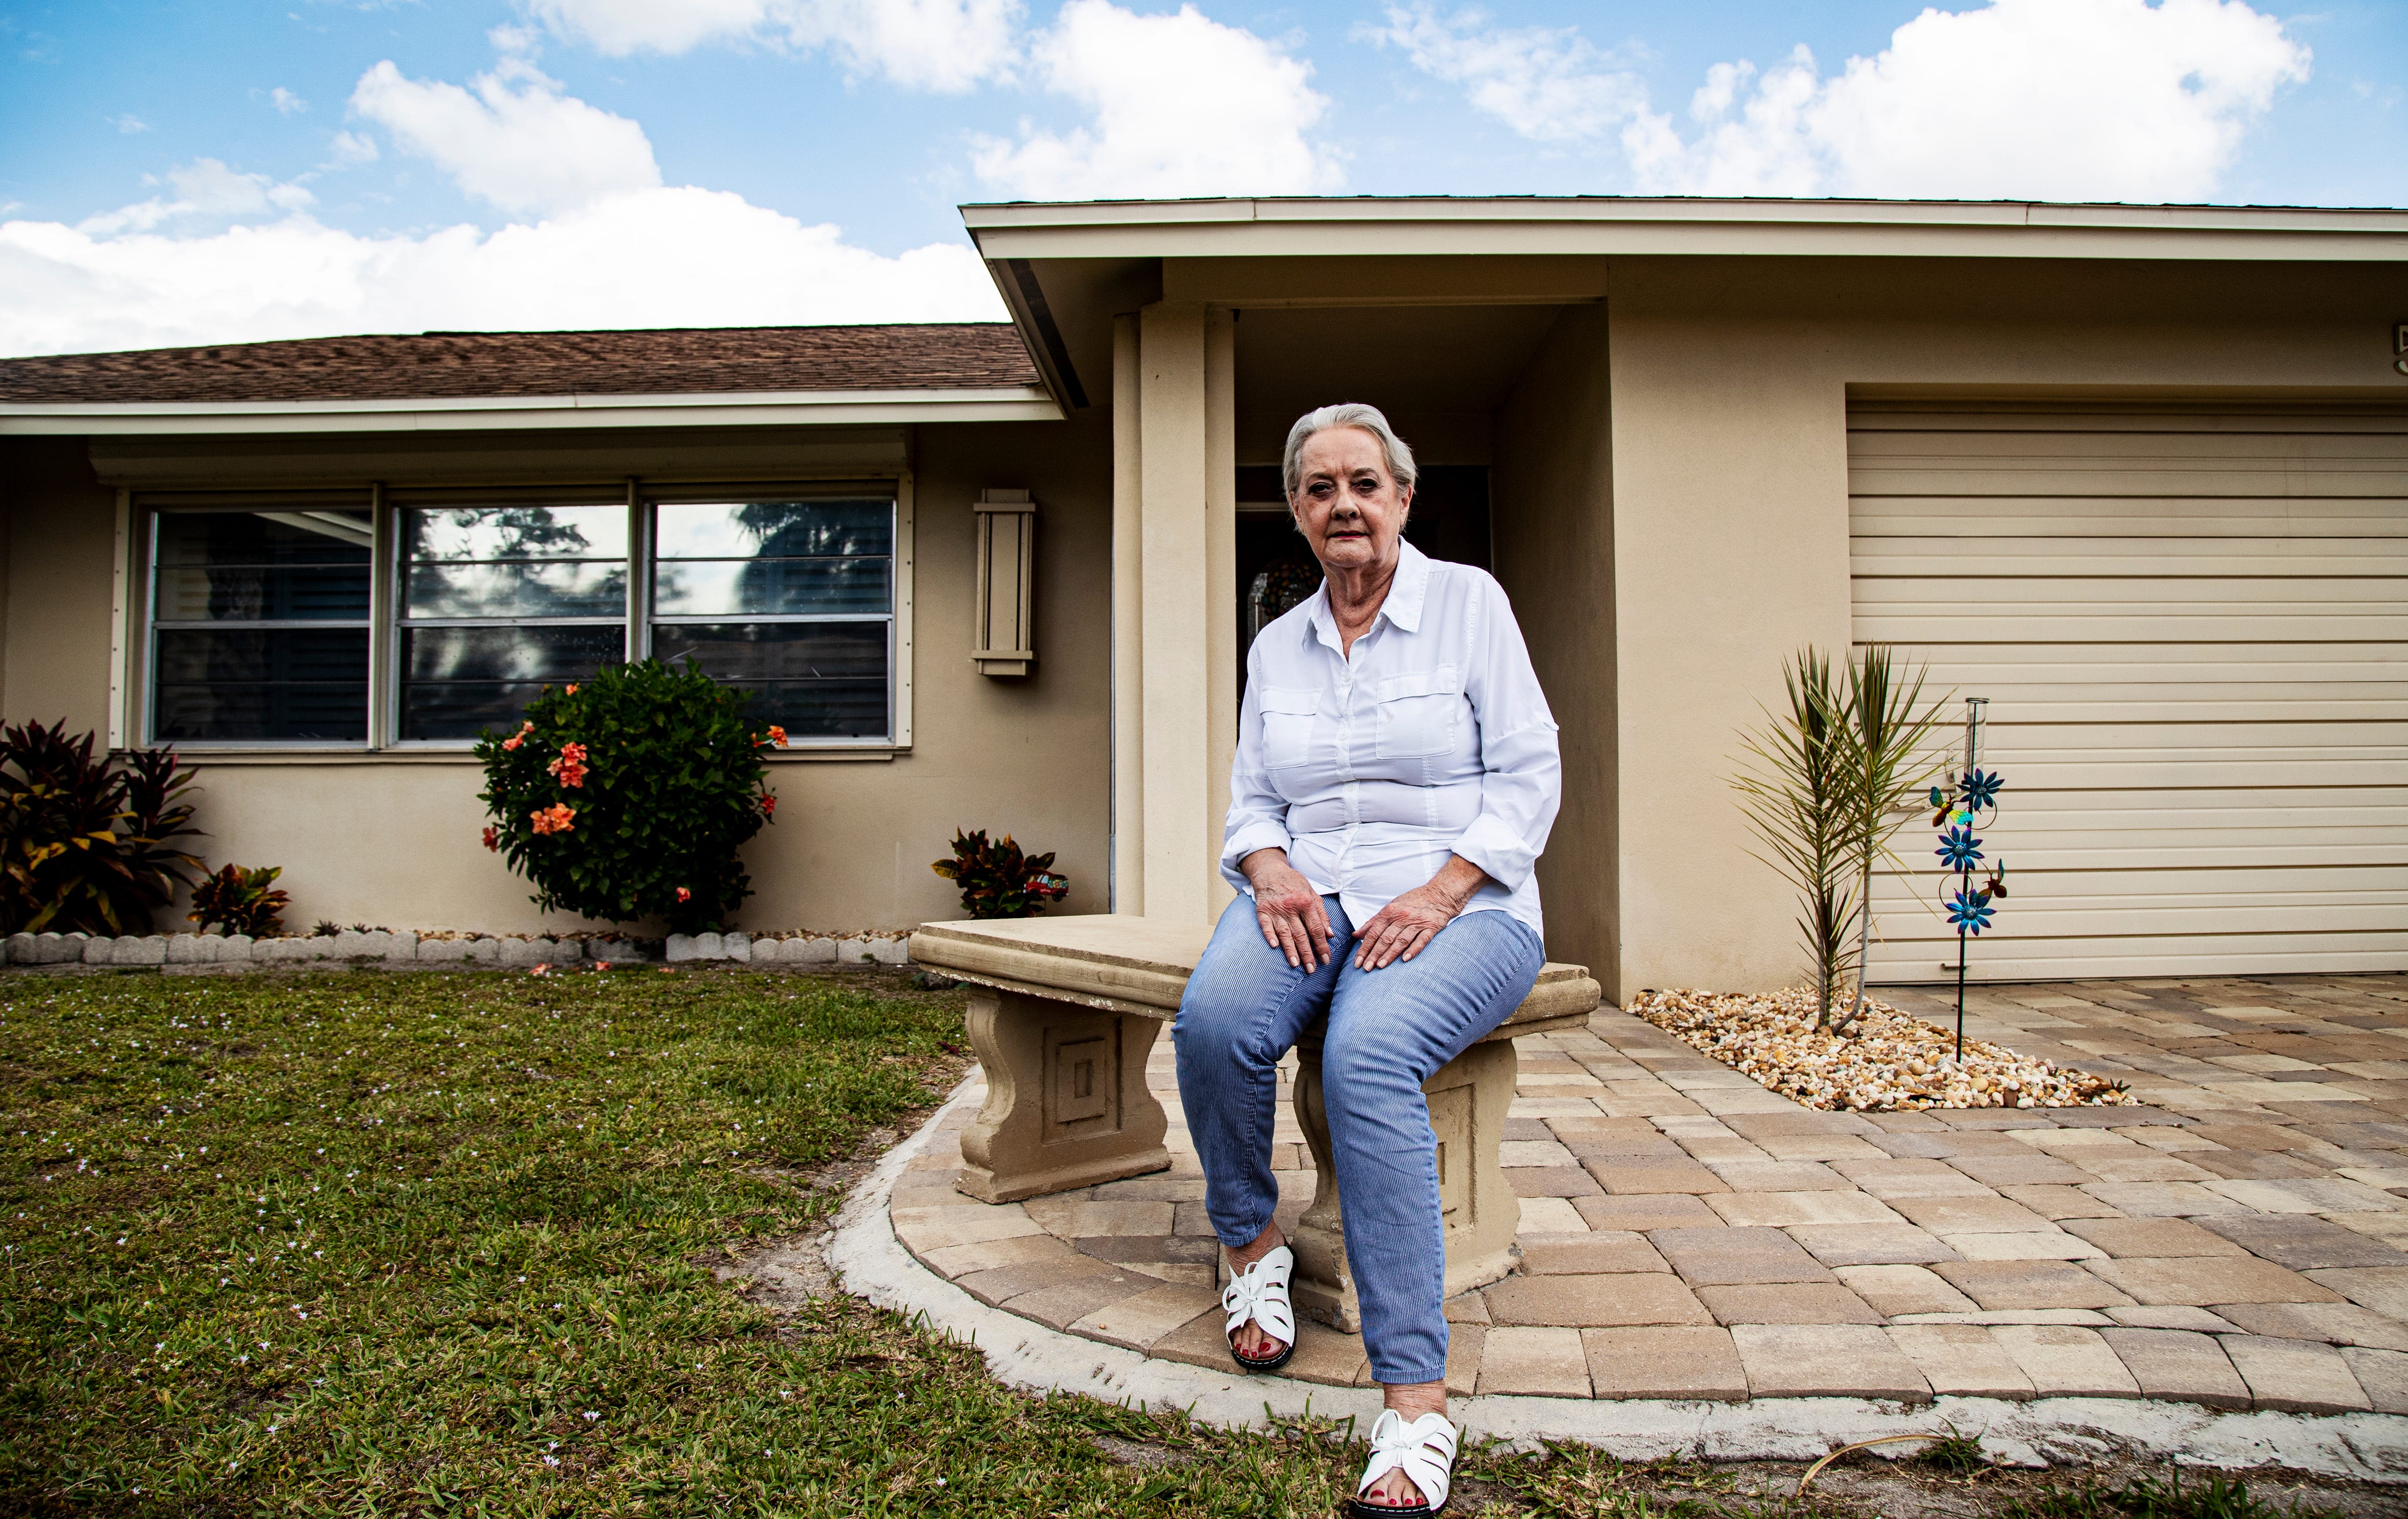 Florida homeowners insurance is skyrocketing: Here’s what to know